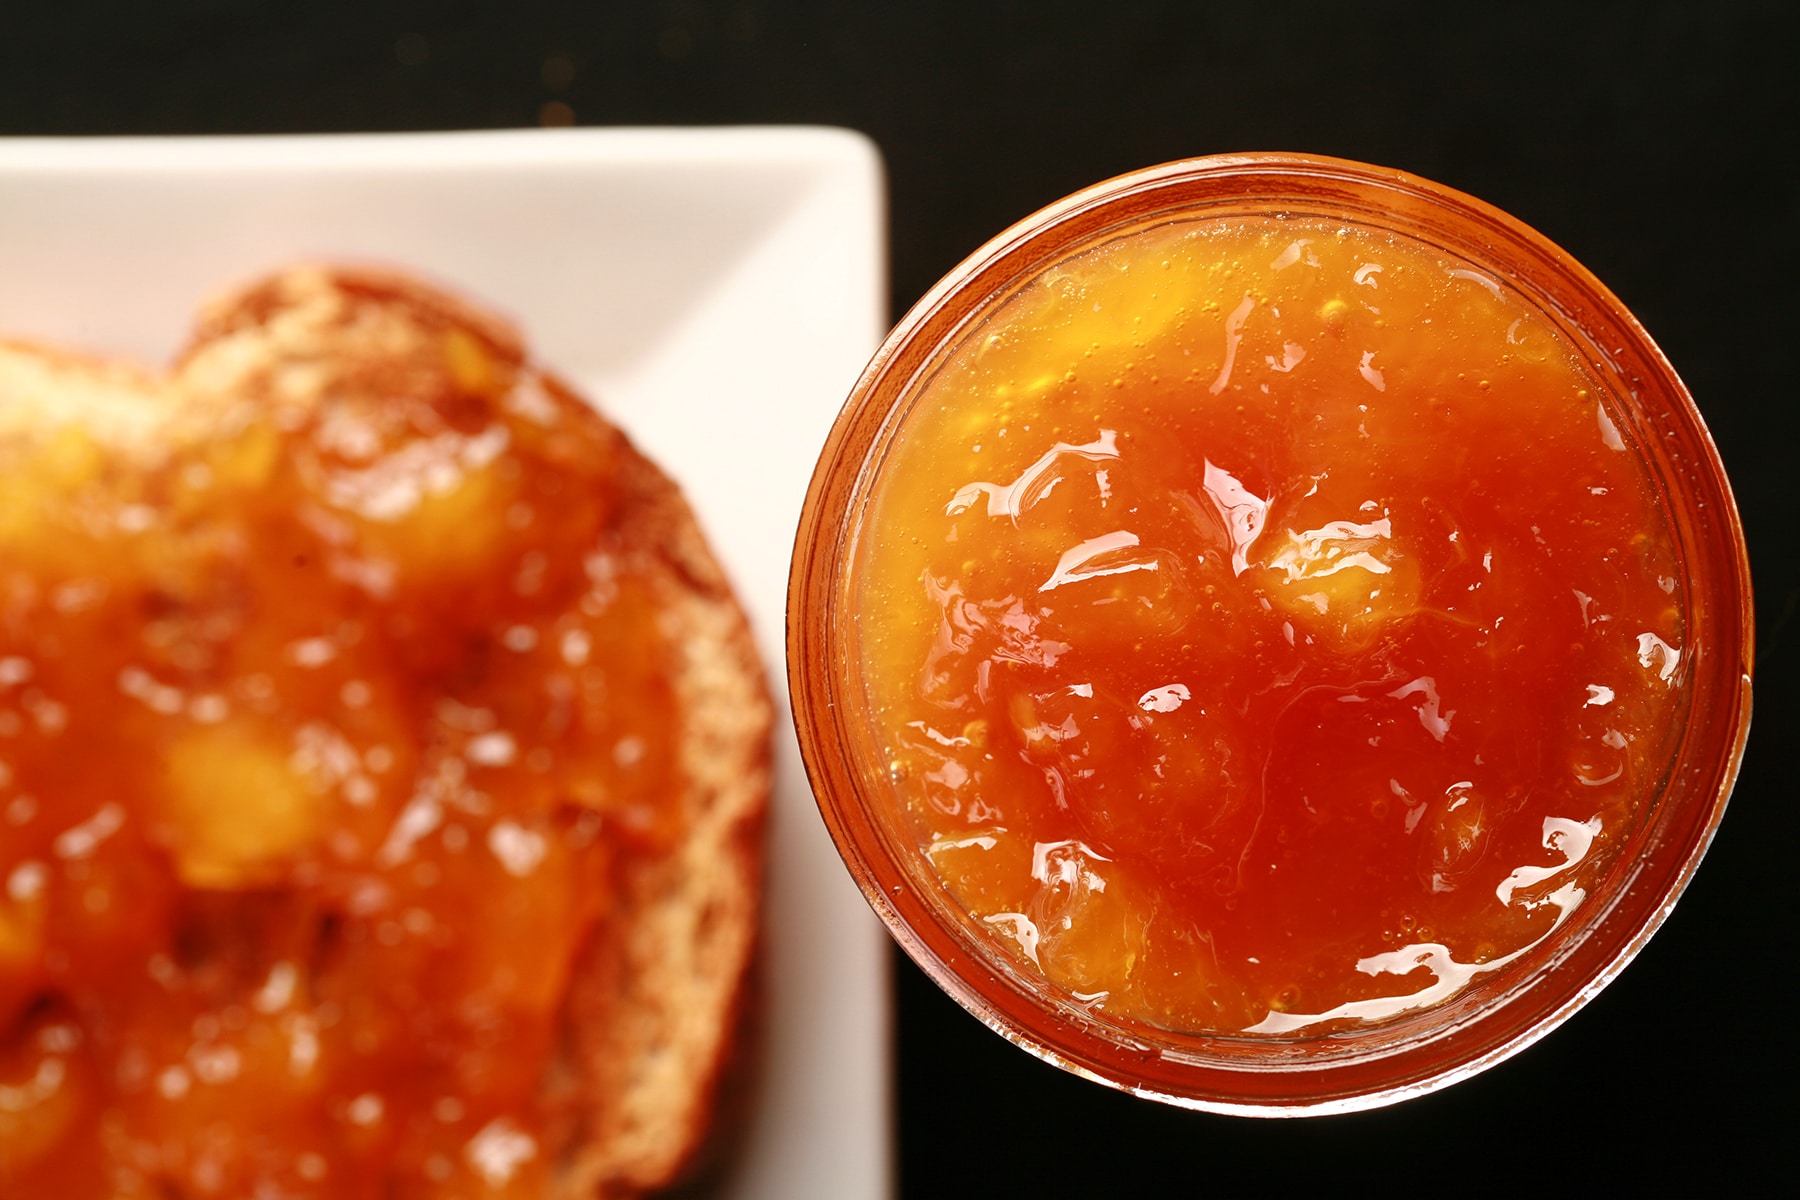 Close up photo of a small jar of orange coloured jam next to a piece of toast